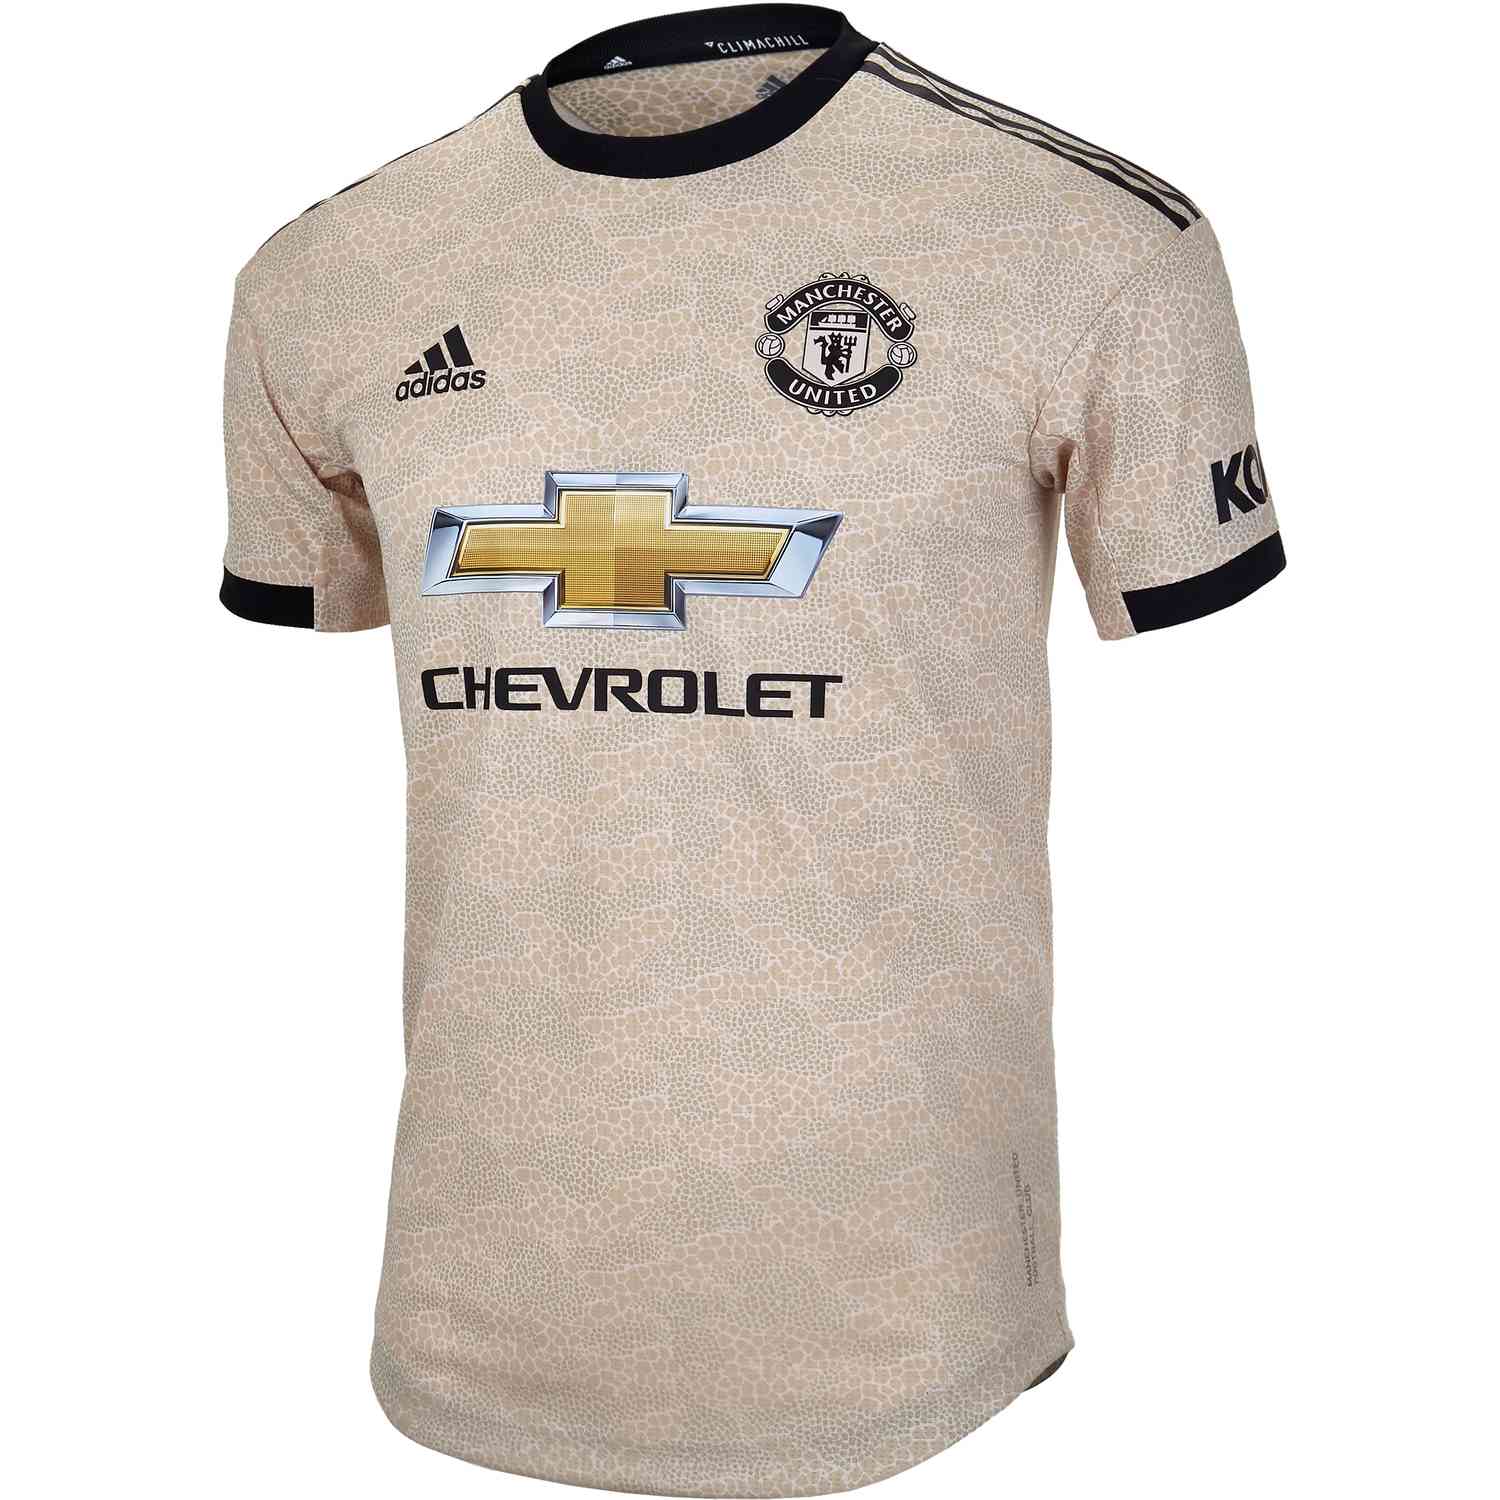 2019/20 adidas Manchester United Away Authentic Jersey - SoccerPro